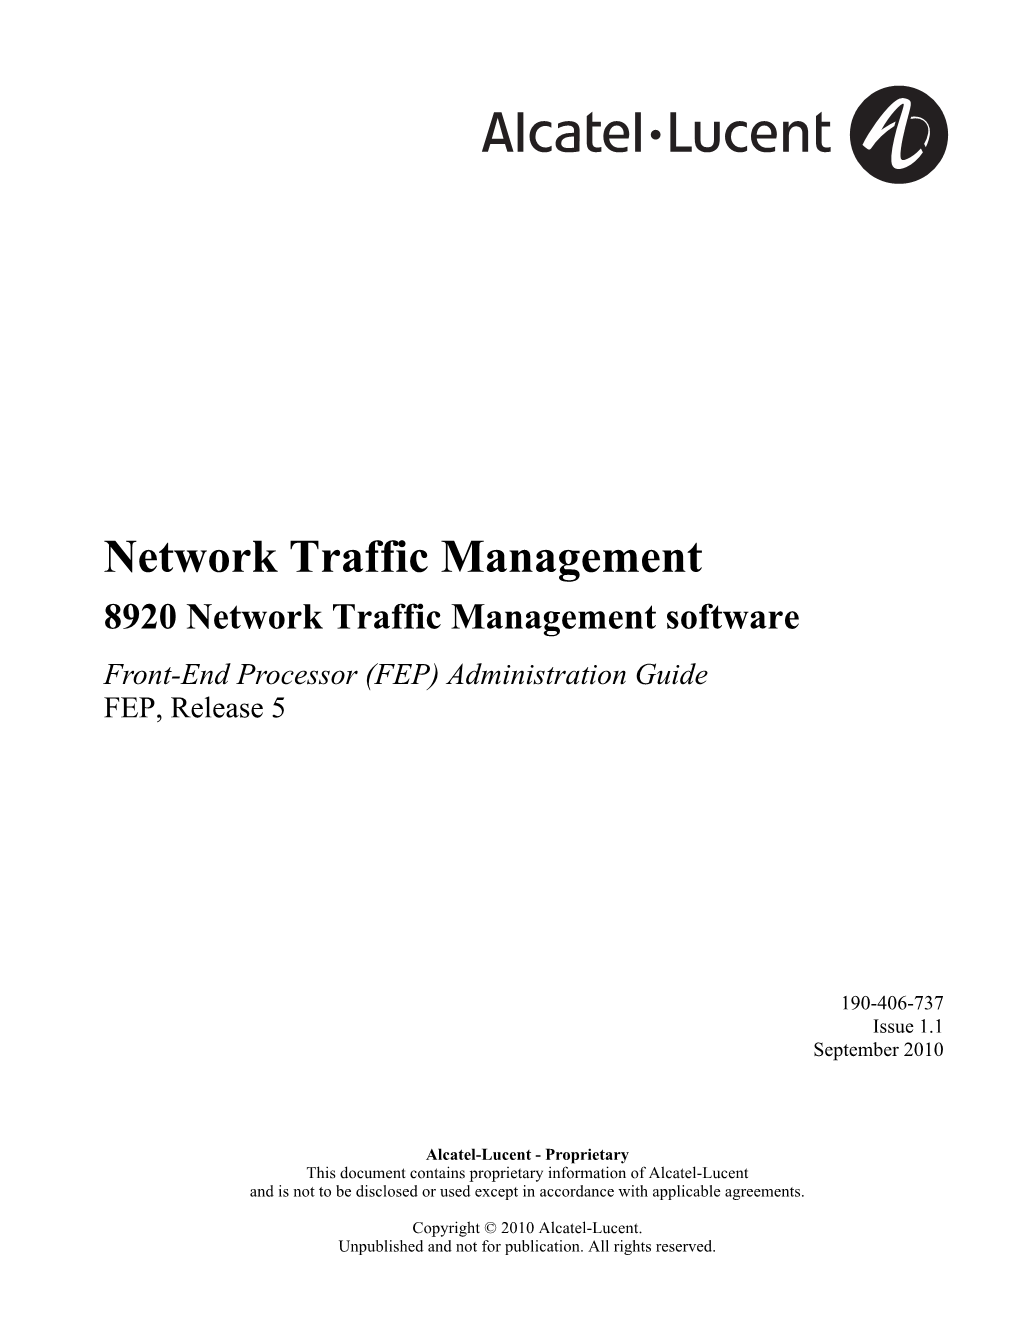 8920 Network Traffic Management Software Front-End Processor (FEP) Administration Guide FEP, Release 5